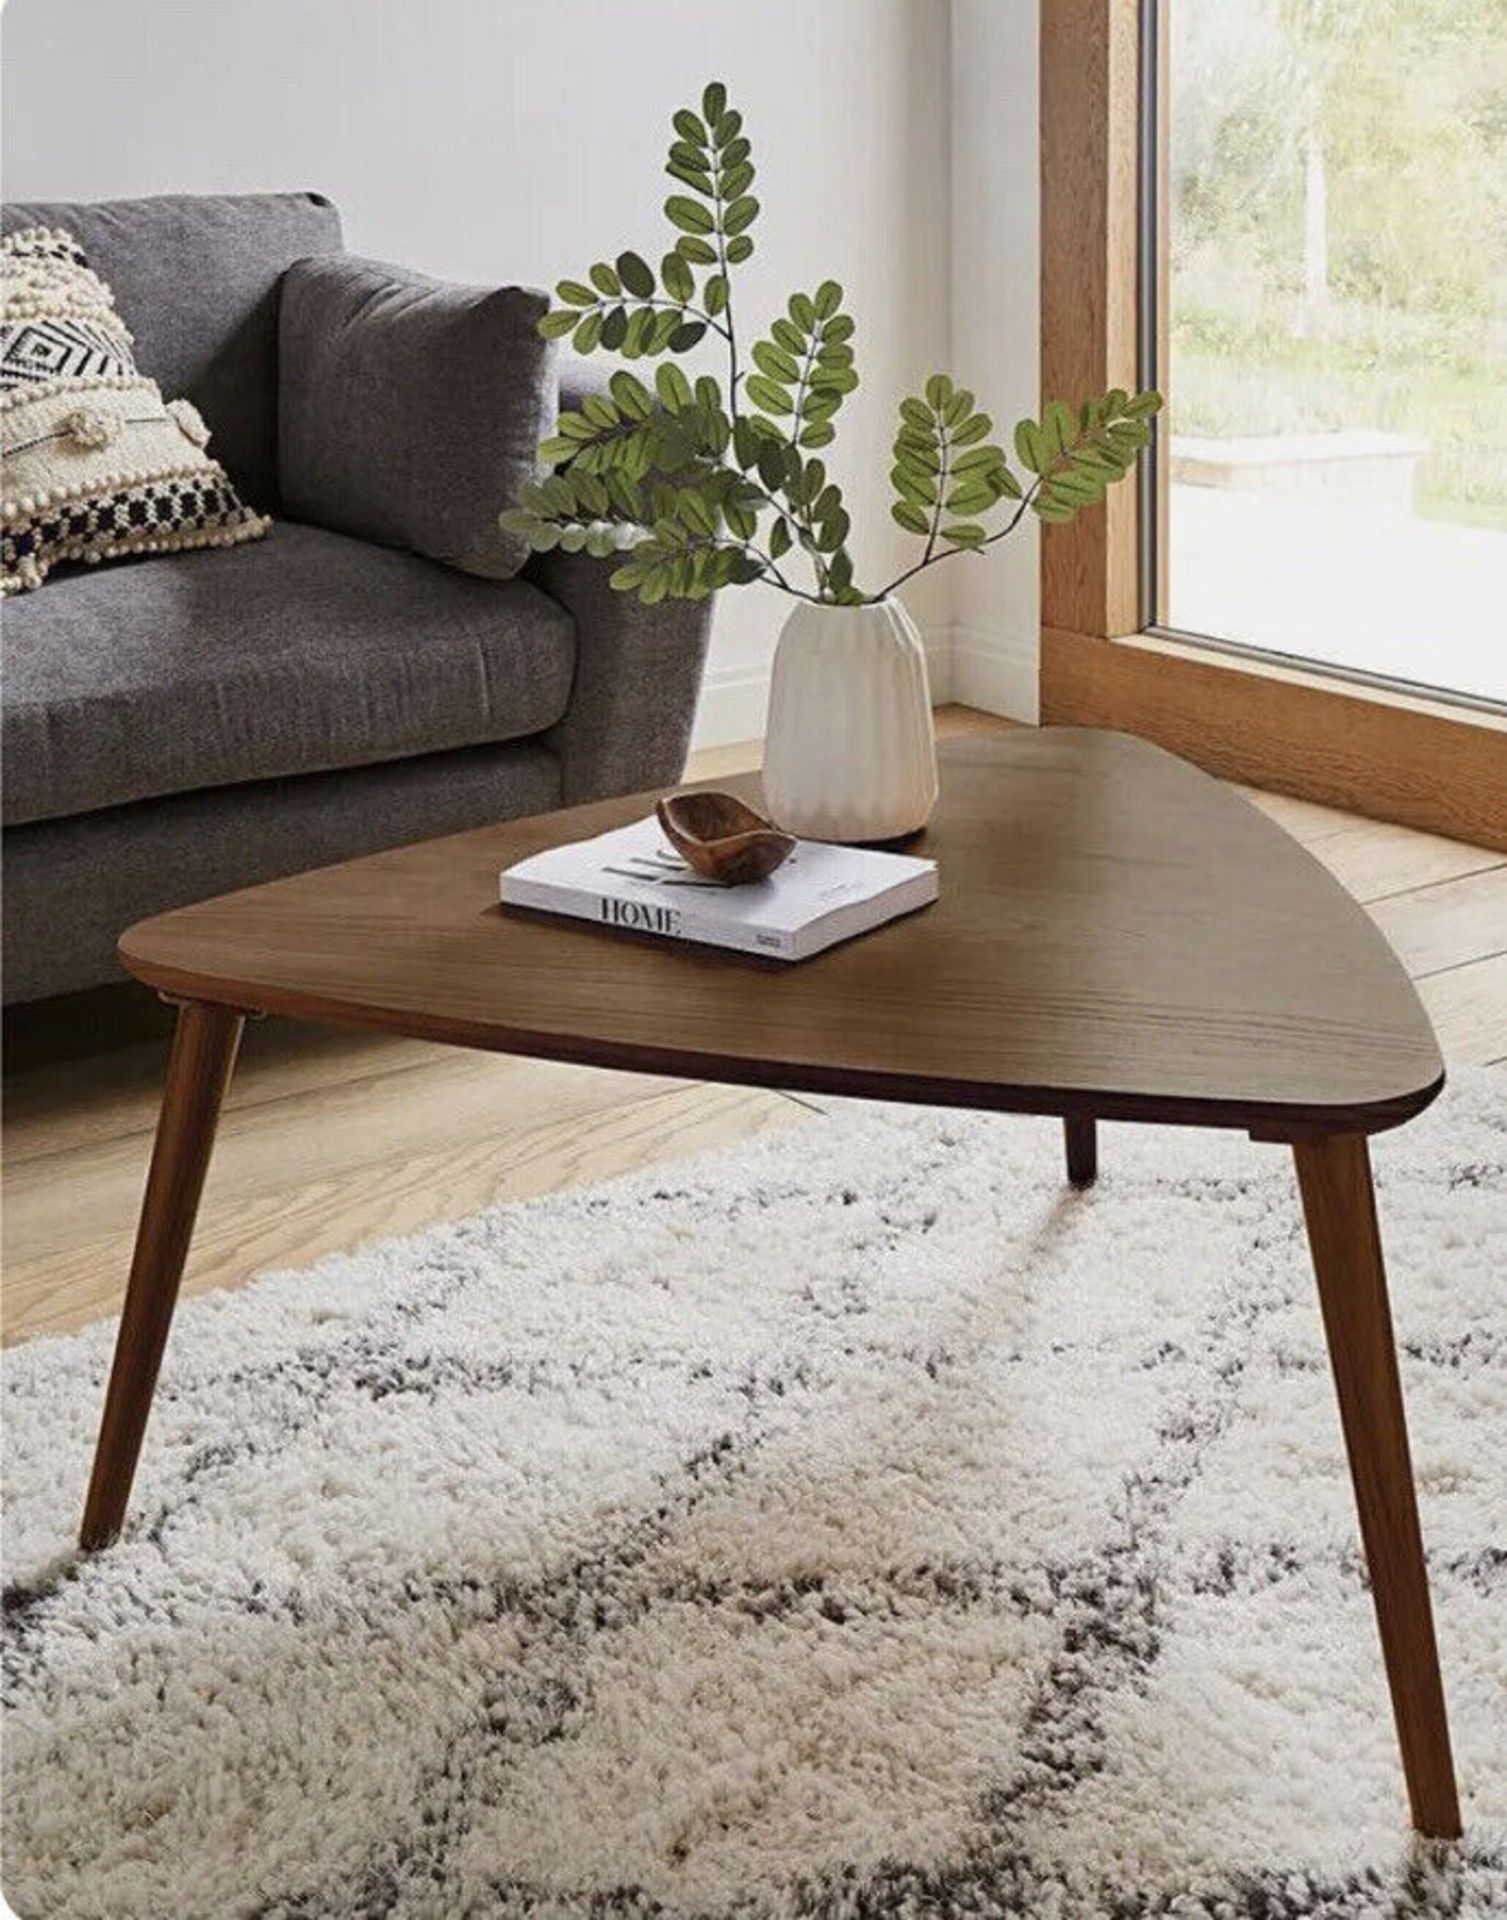 NEW & BOXED PEYTON Walnut Coffee Table. RRP £269. Part of At Home Luxe, the Peyton Walnut Coffee